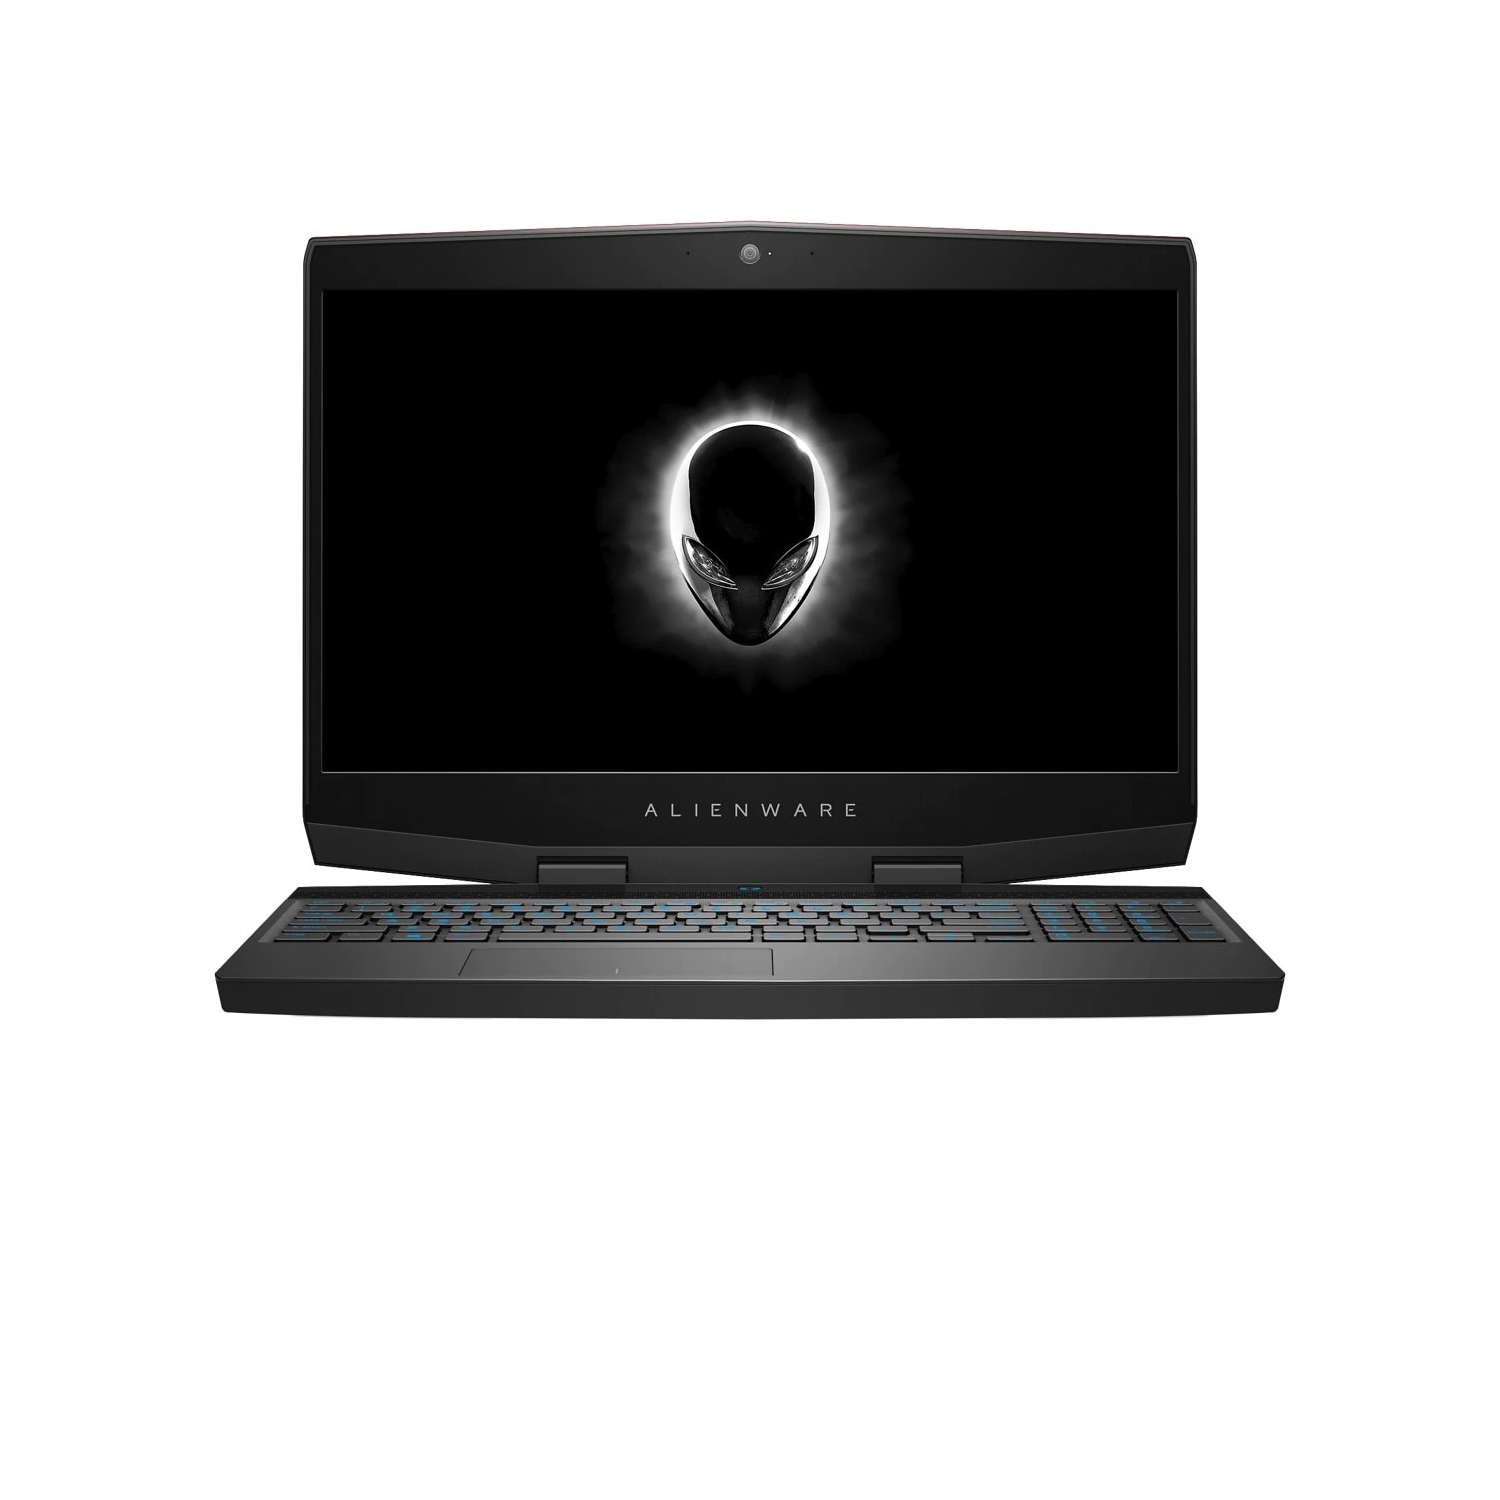 Refurbished (Excellent) - Dell Alienware m15 Gaming Laptop (2018), 15.6" FHD, Core i7, 512GB SSD + 512GB SSD, 32GB RAM, RTX 2070, 6 Cores @ 4.5 GHz Certified Refurbished